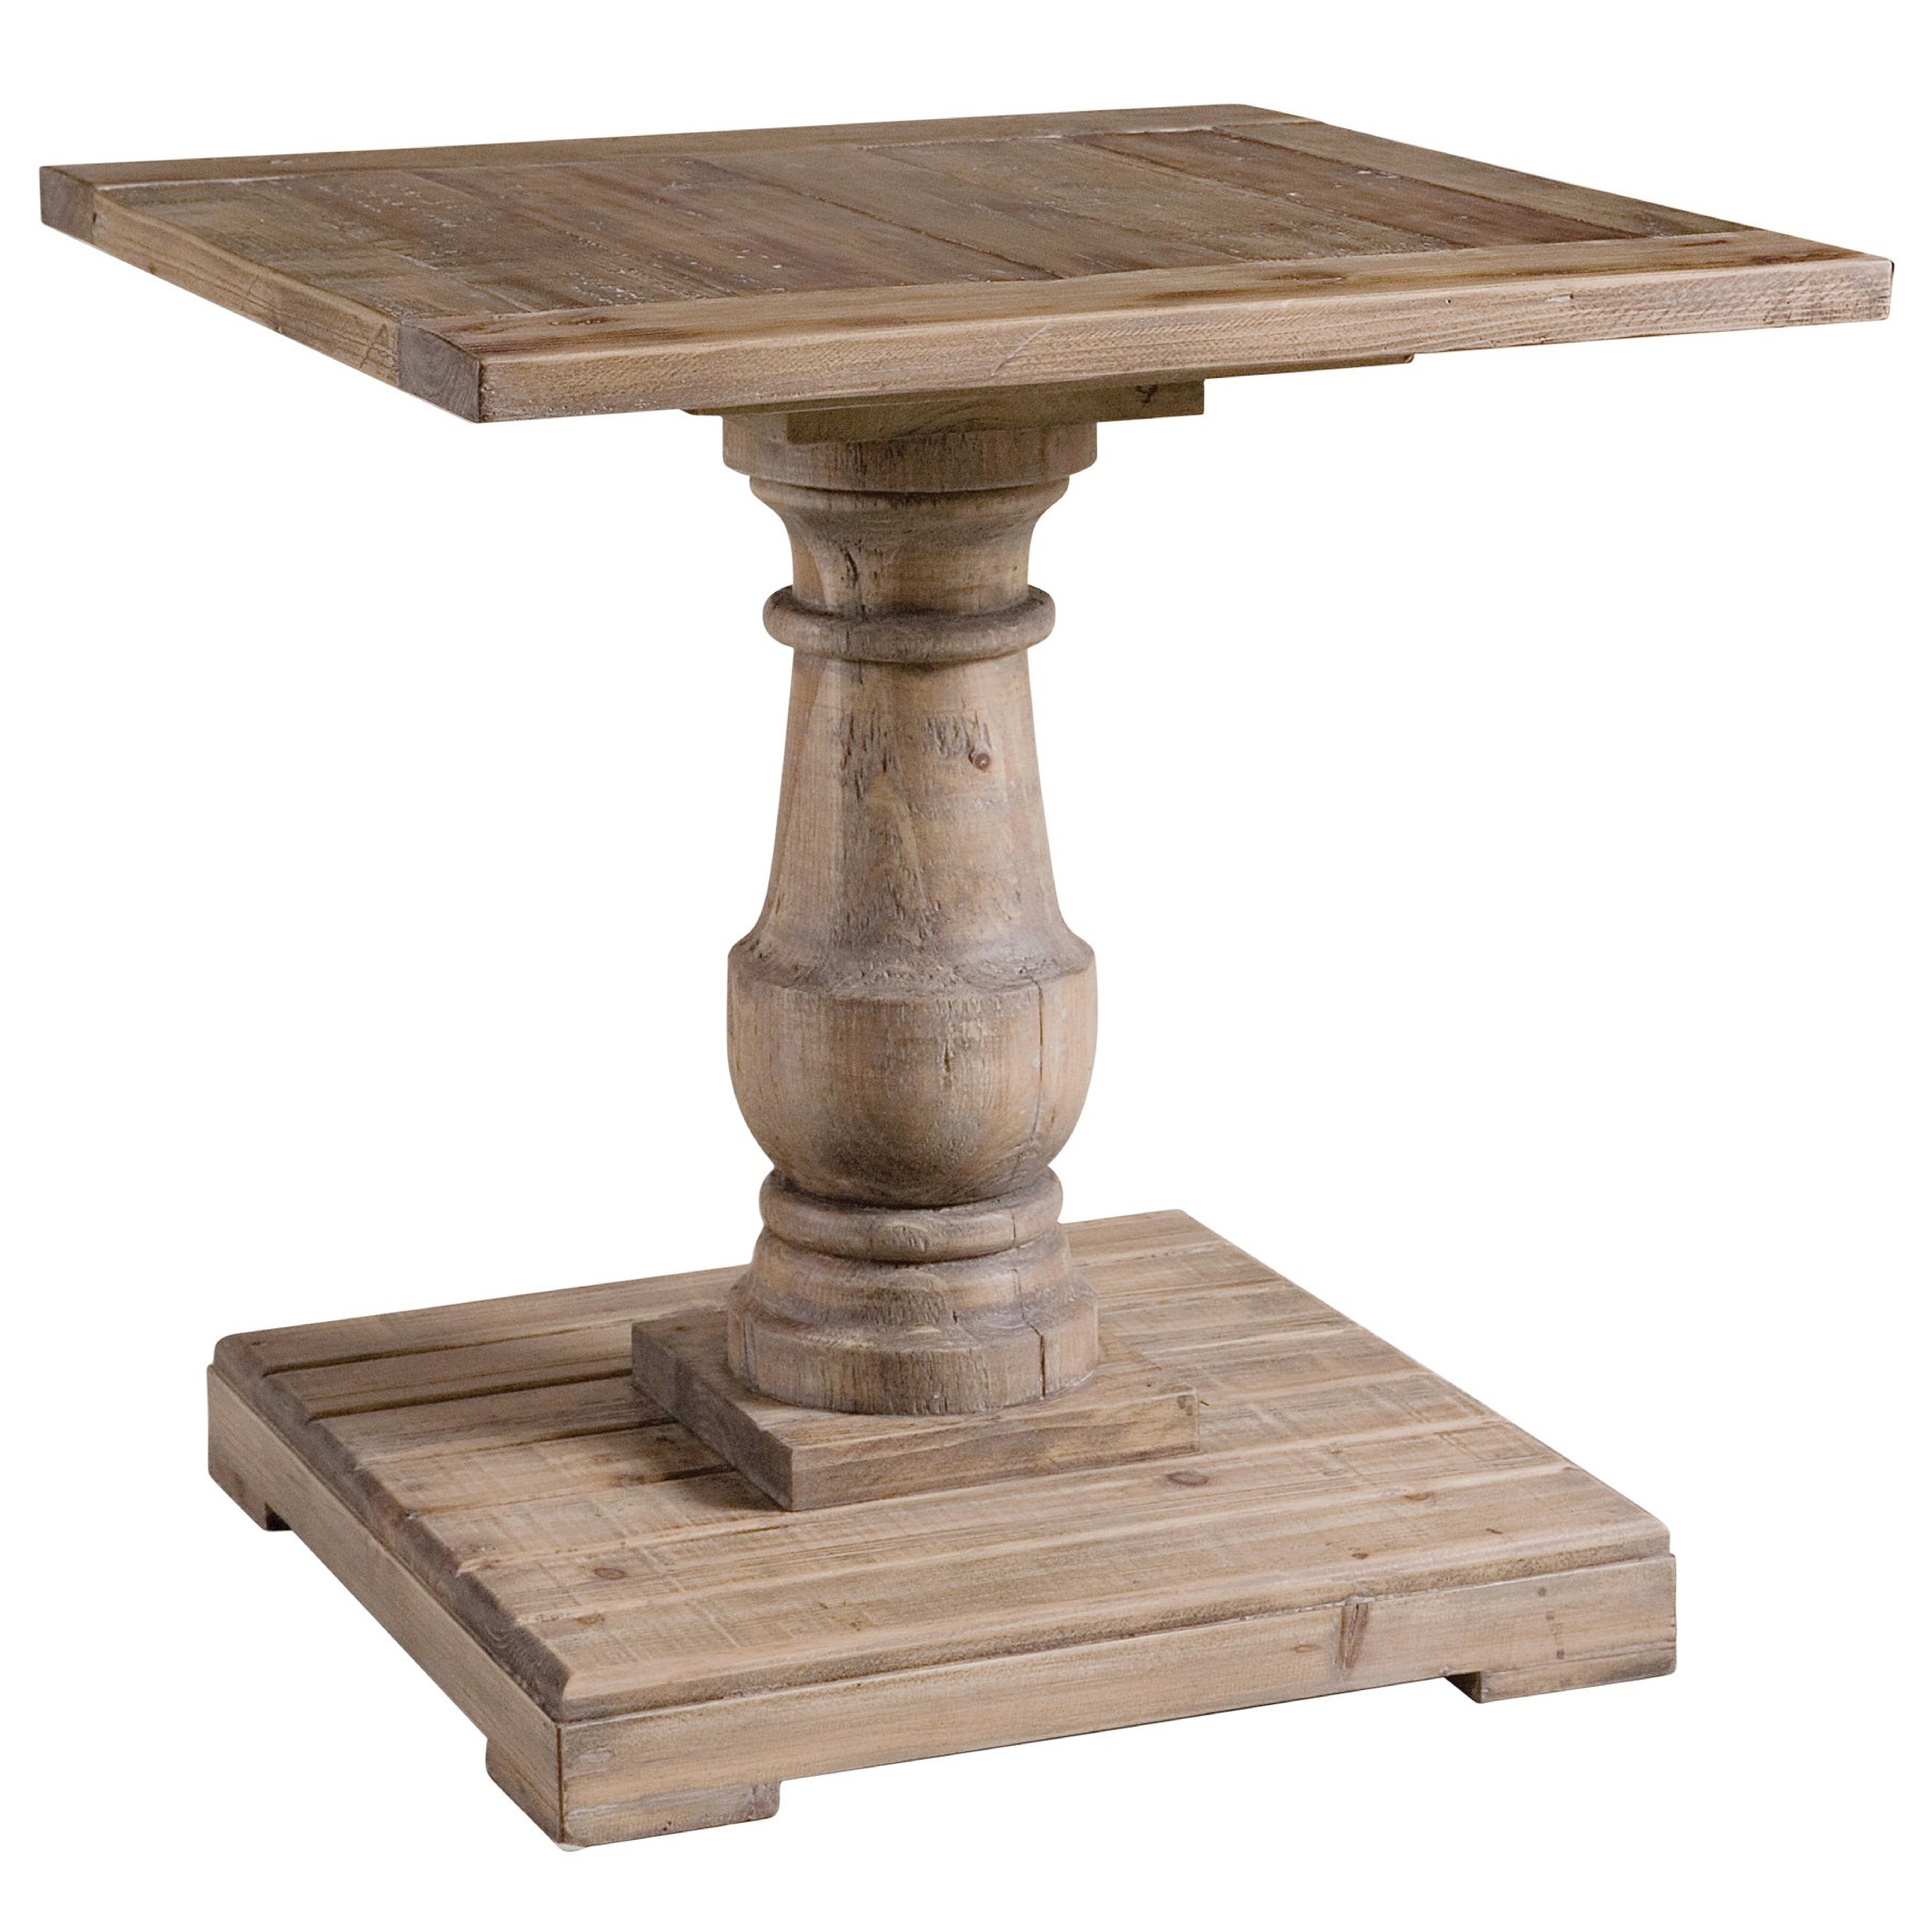 Gamble Rustic Lodge Salvaged Fir Stone Wash Pedestal End Table - Kathy Kuo Home